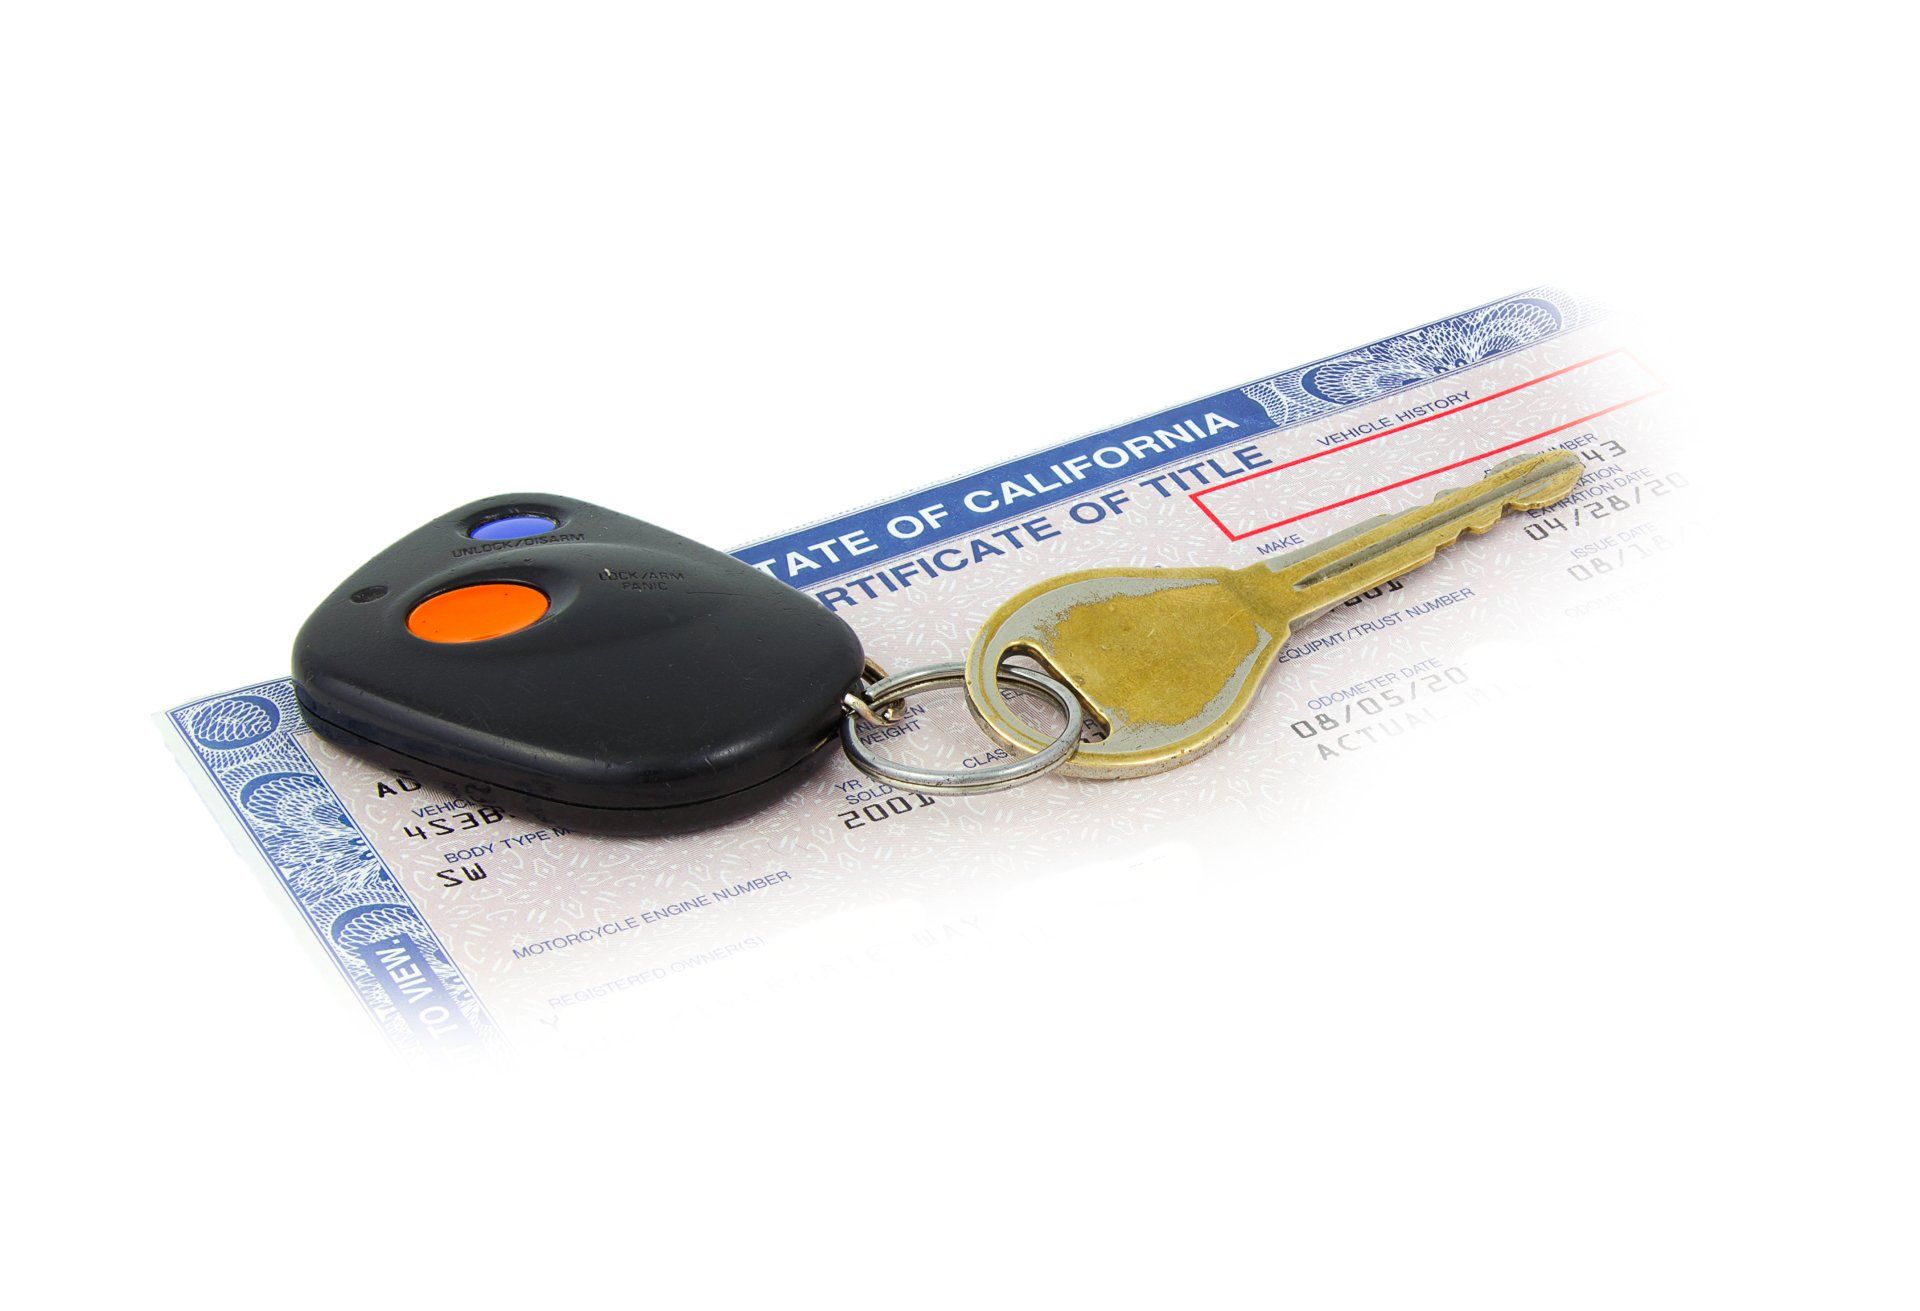 Car Title and Keys to Sell Vehicle